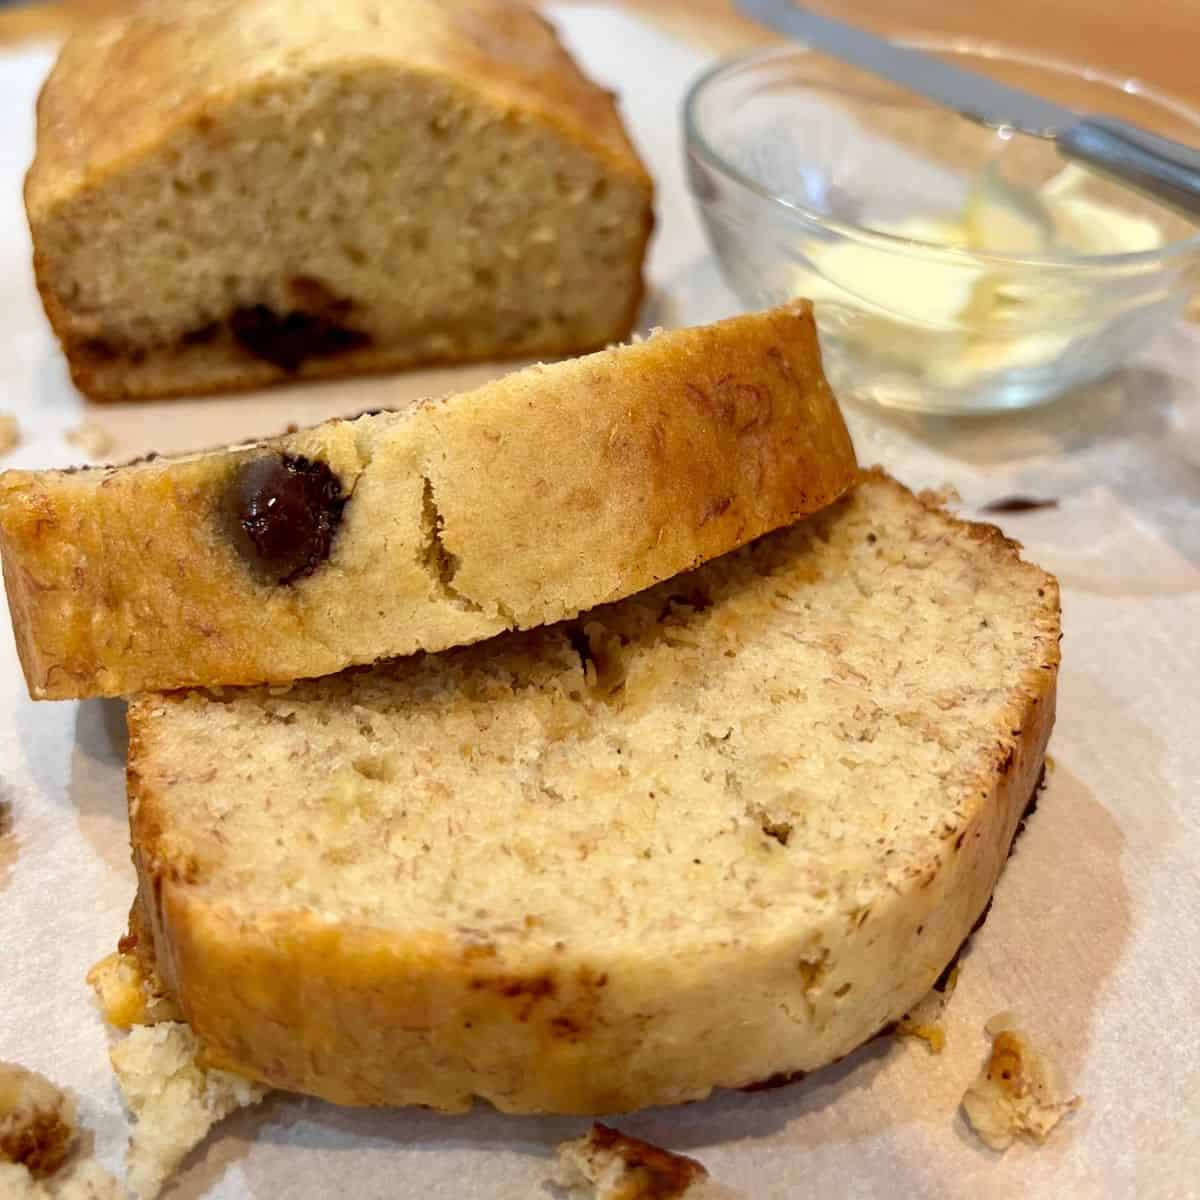 Slices of chocolate chip banana bread on parchment paper with a small glass bowl filled with butter